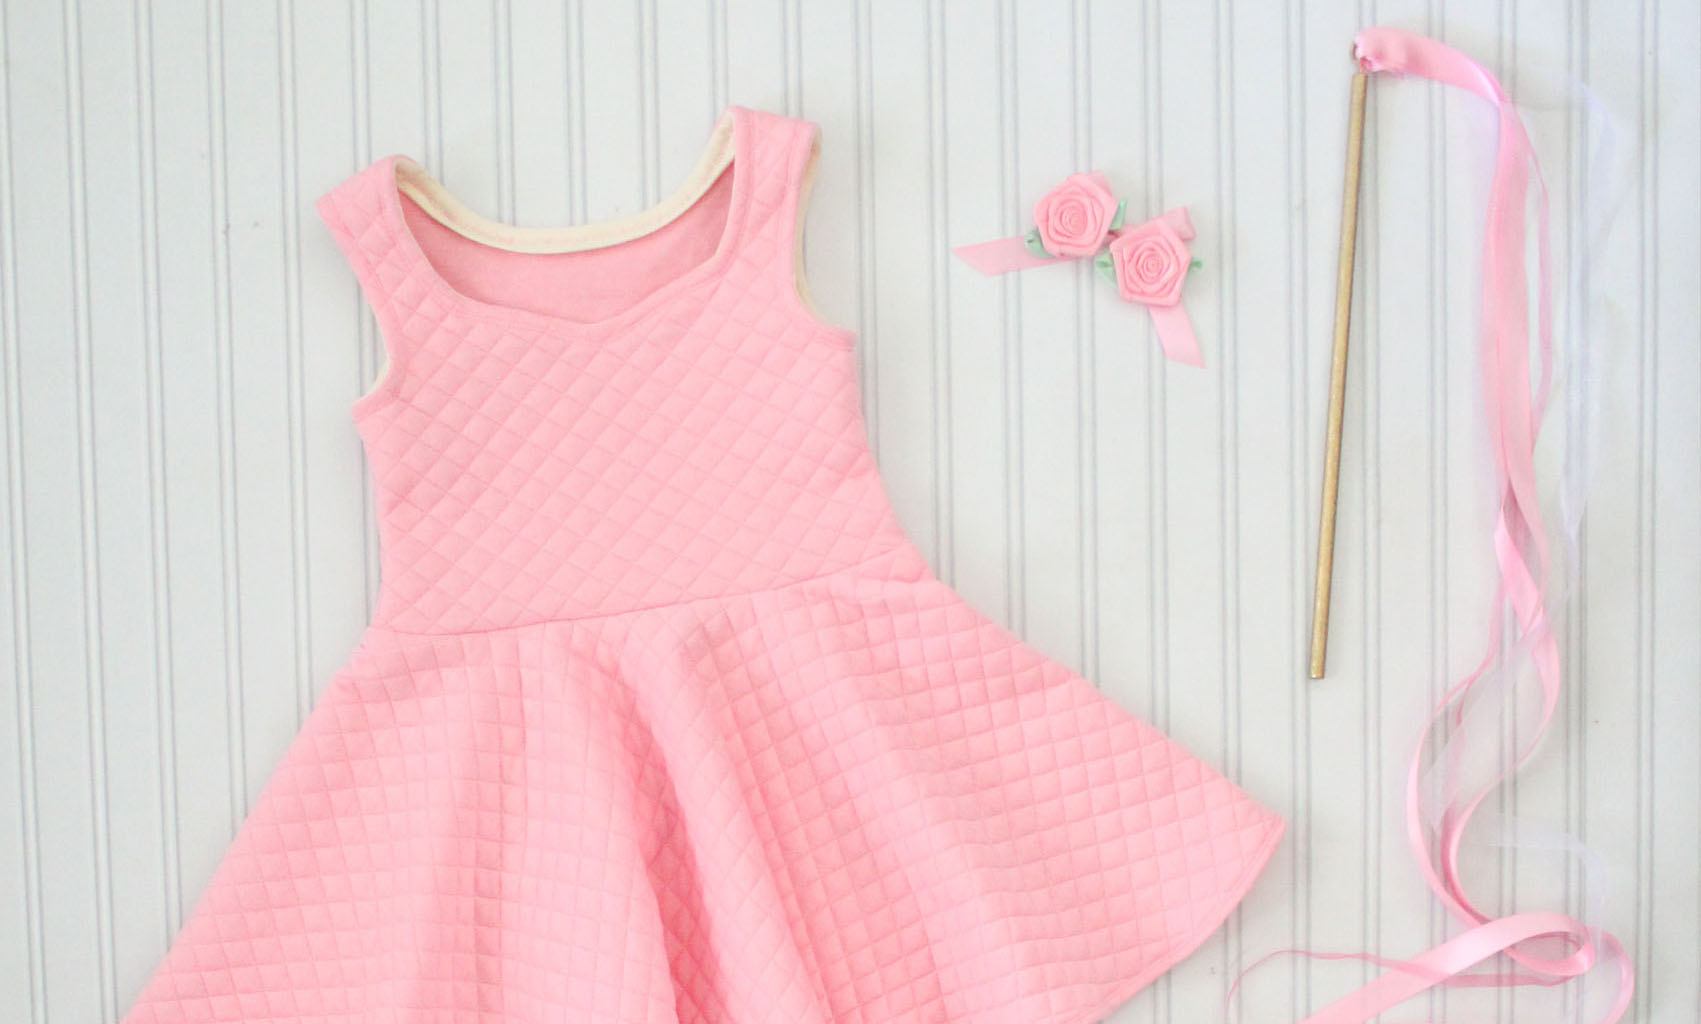 The Perfectly Perfect Pink Birthday Dress - Sewing for Girls - Sewing with Knit